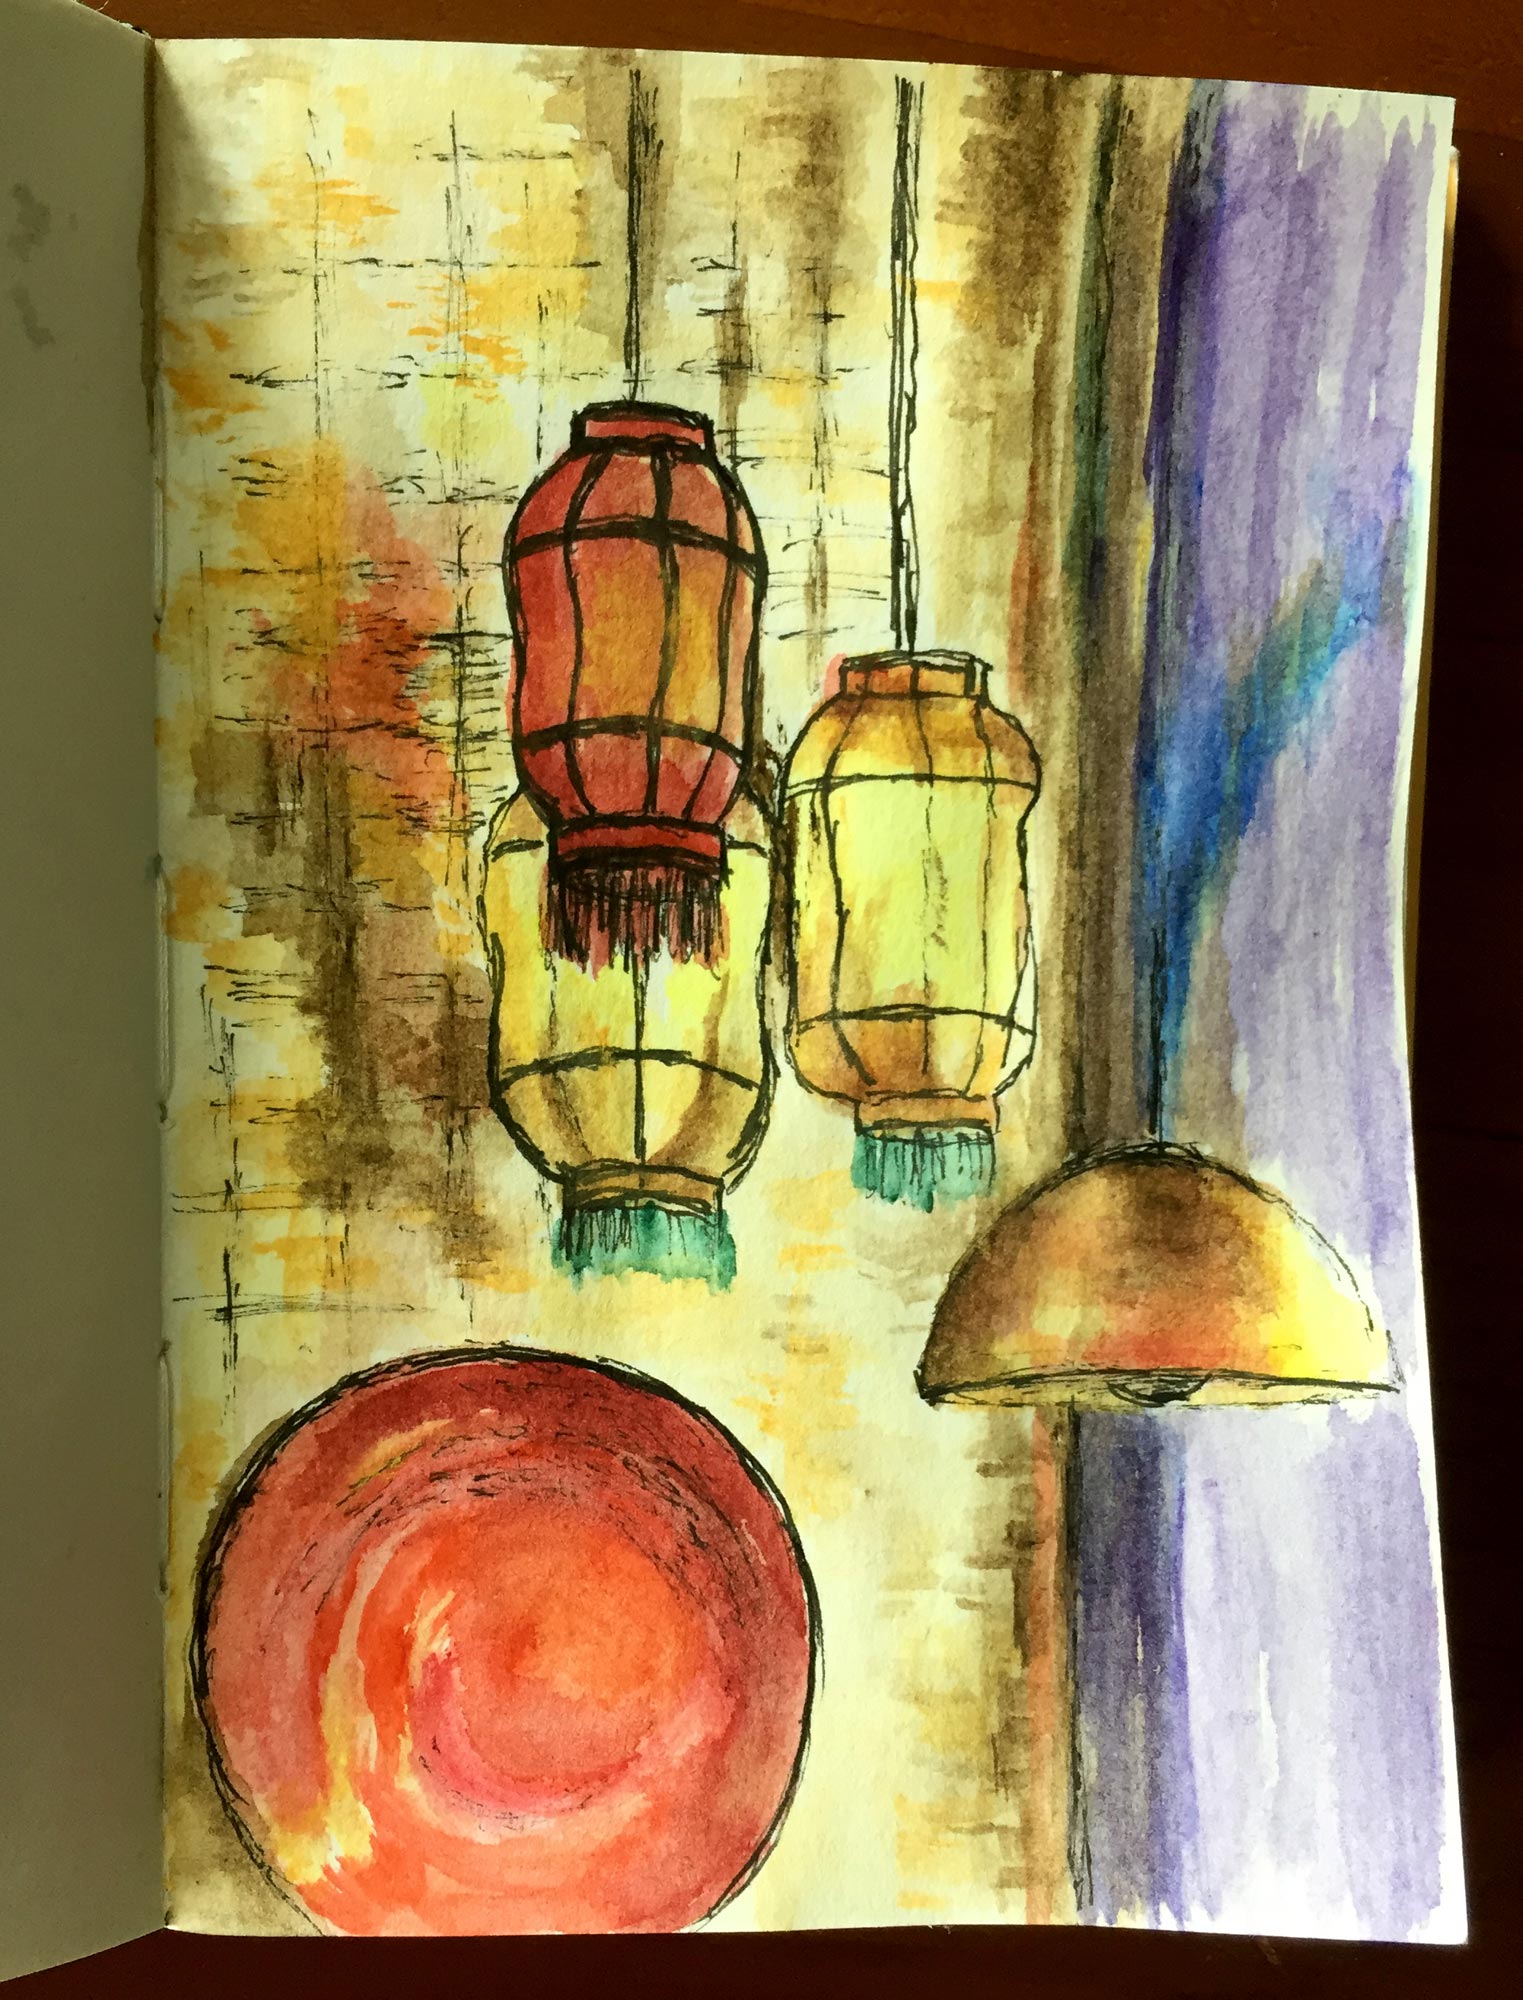 A Restaurant Interior is an ink and watercolour sketch